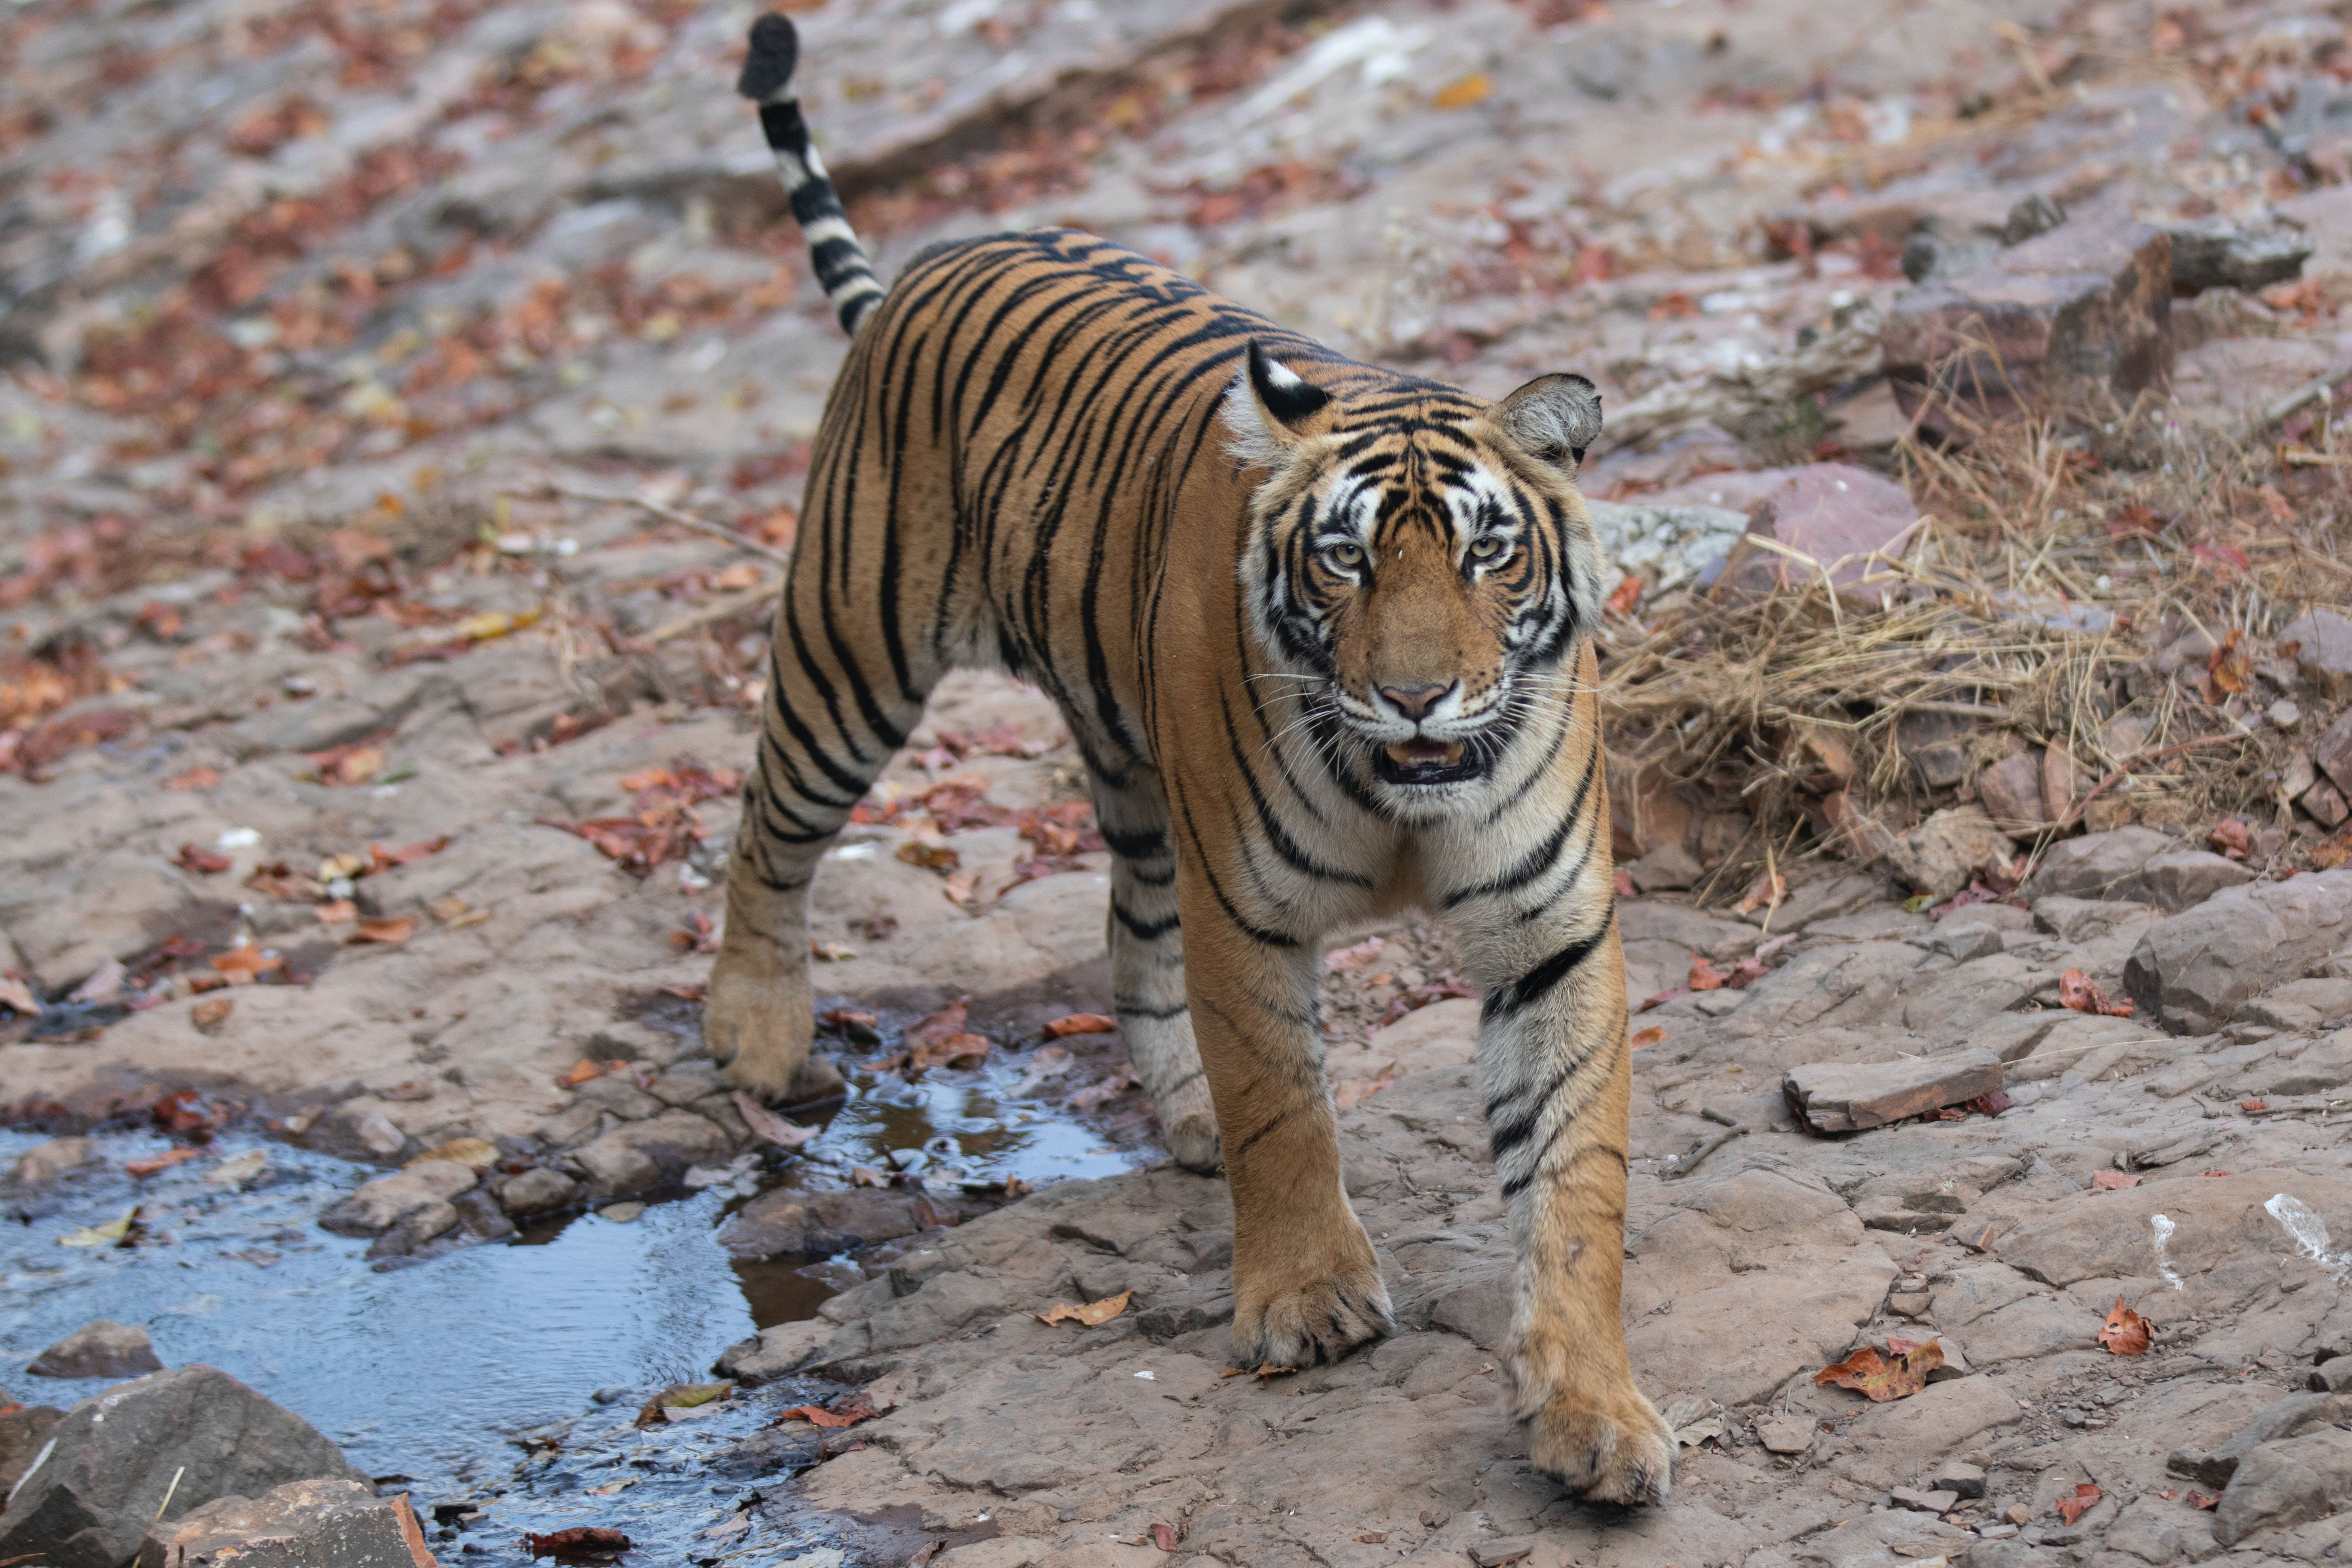 Tiger in Ranthambore National Park, India 